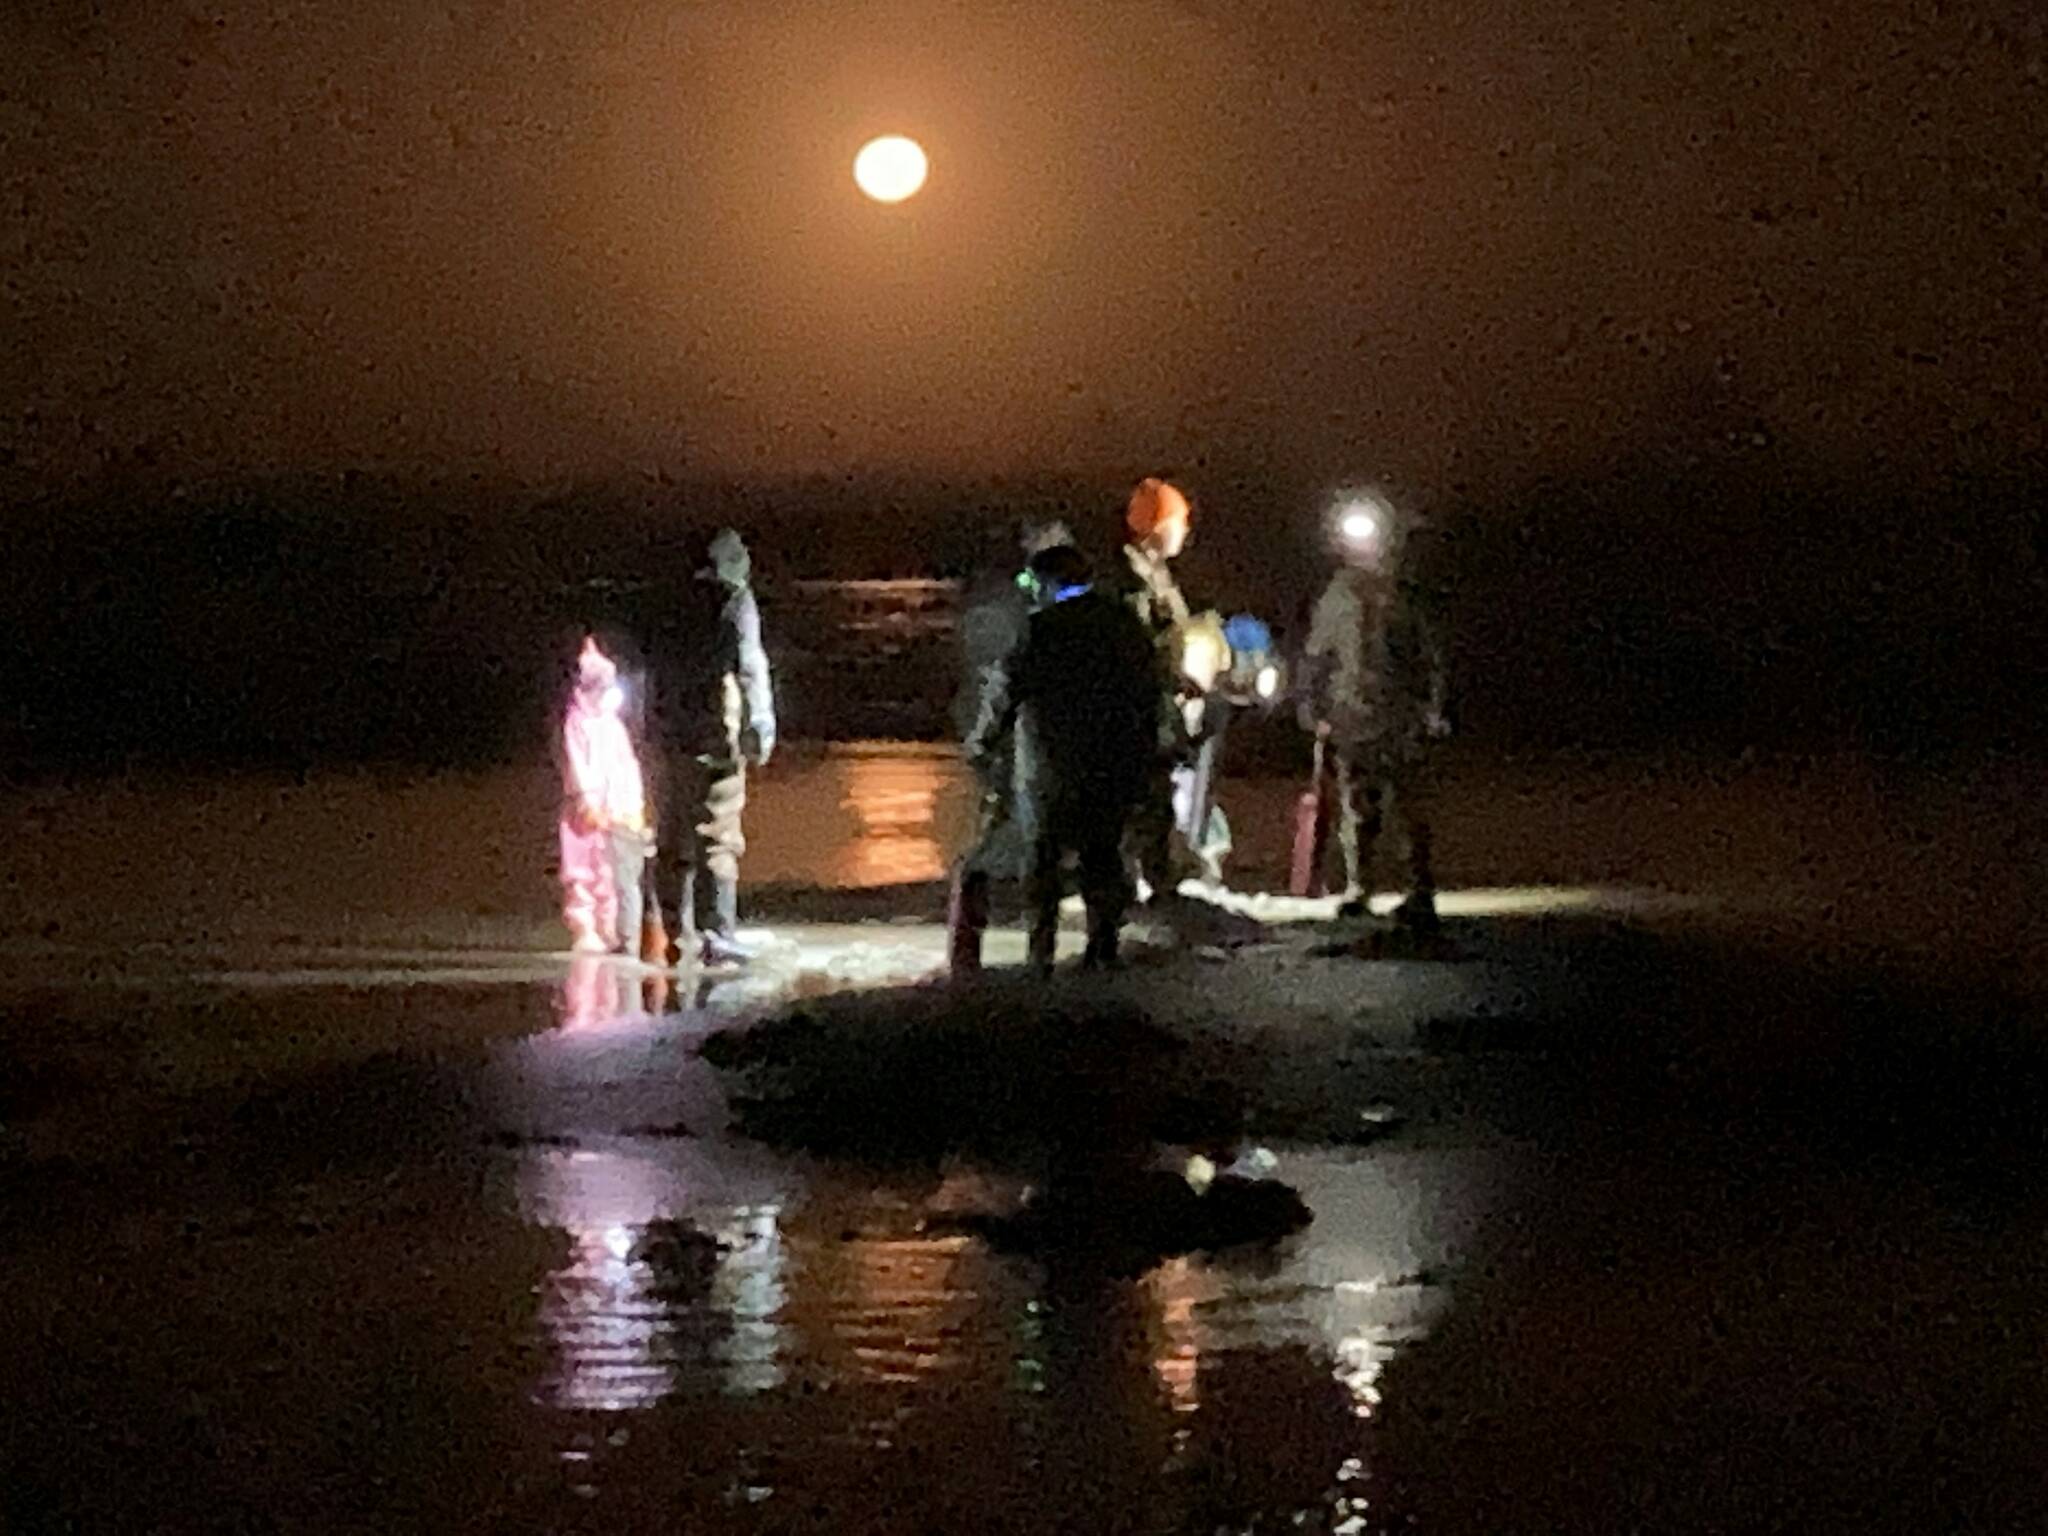 Courtesy of Department of Fish and Wildlife 
Diggers hit Twin Harbors Beach for a morning razor clam dig on Sept. 21, 2021. More than 1,300 diggers took just under 25,000 clams around the 7:20 a.m. minus tide.